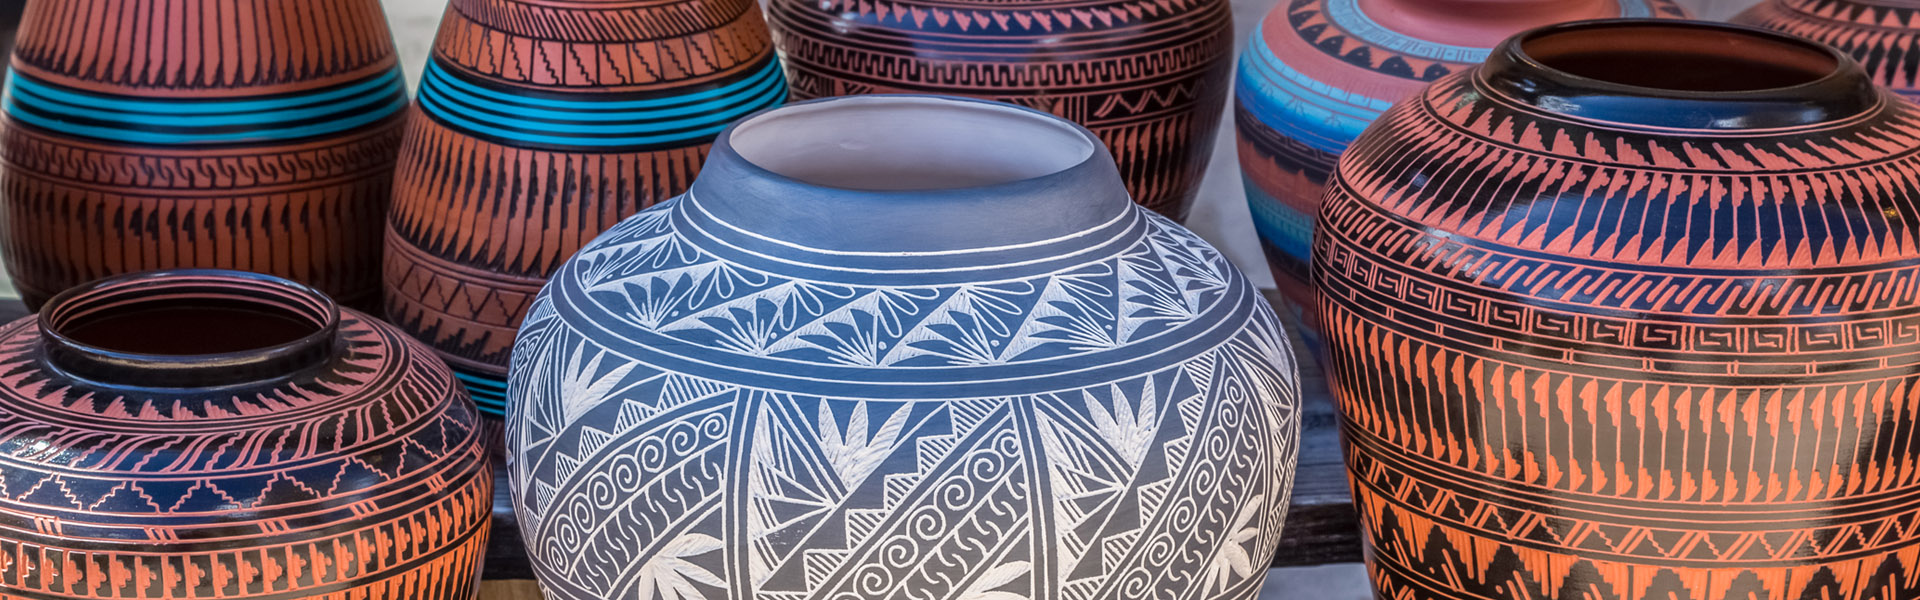 Clay Pots With Native American Art